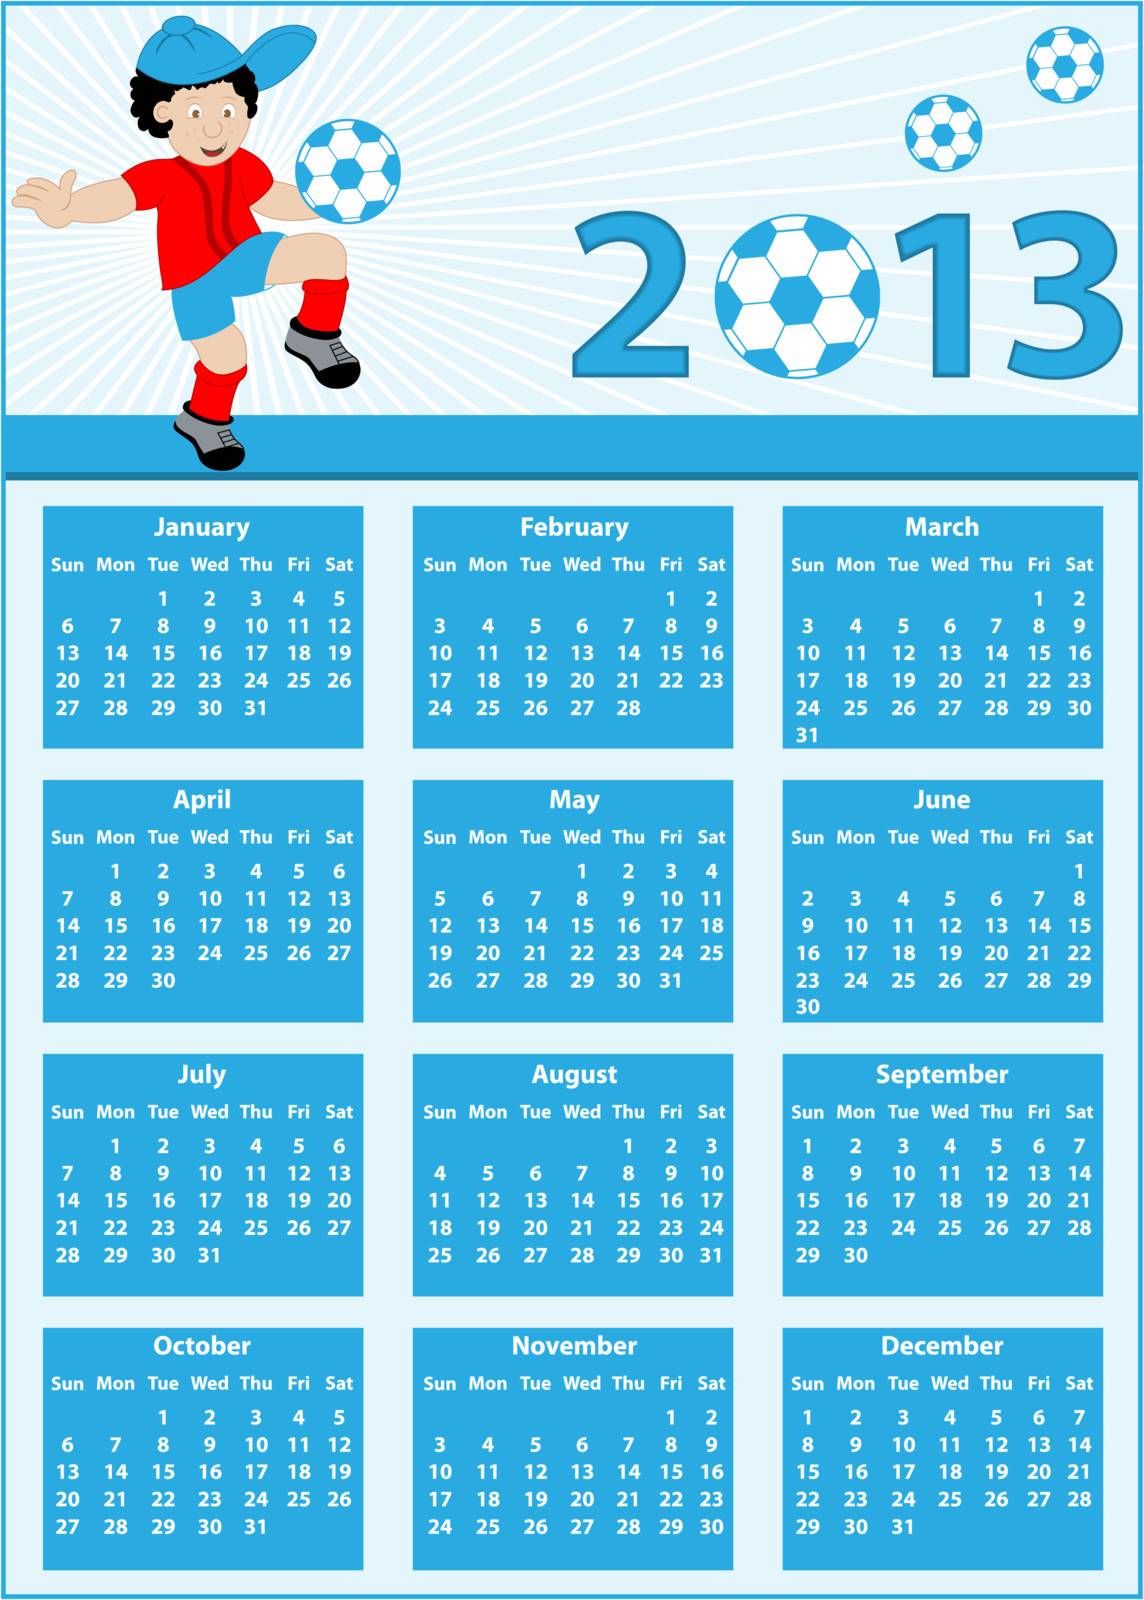 Calendar 2013 with a soccer theme. Child football player cartoon character bouncing his ball on his knee.